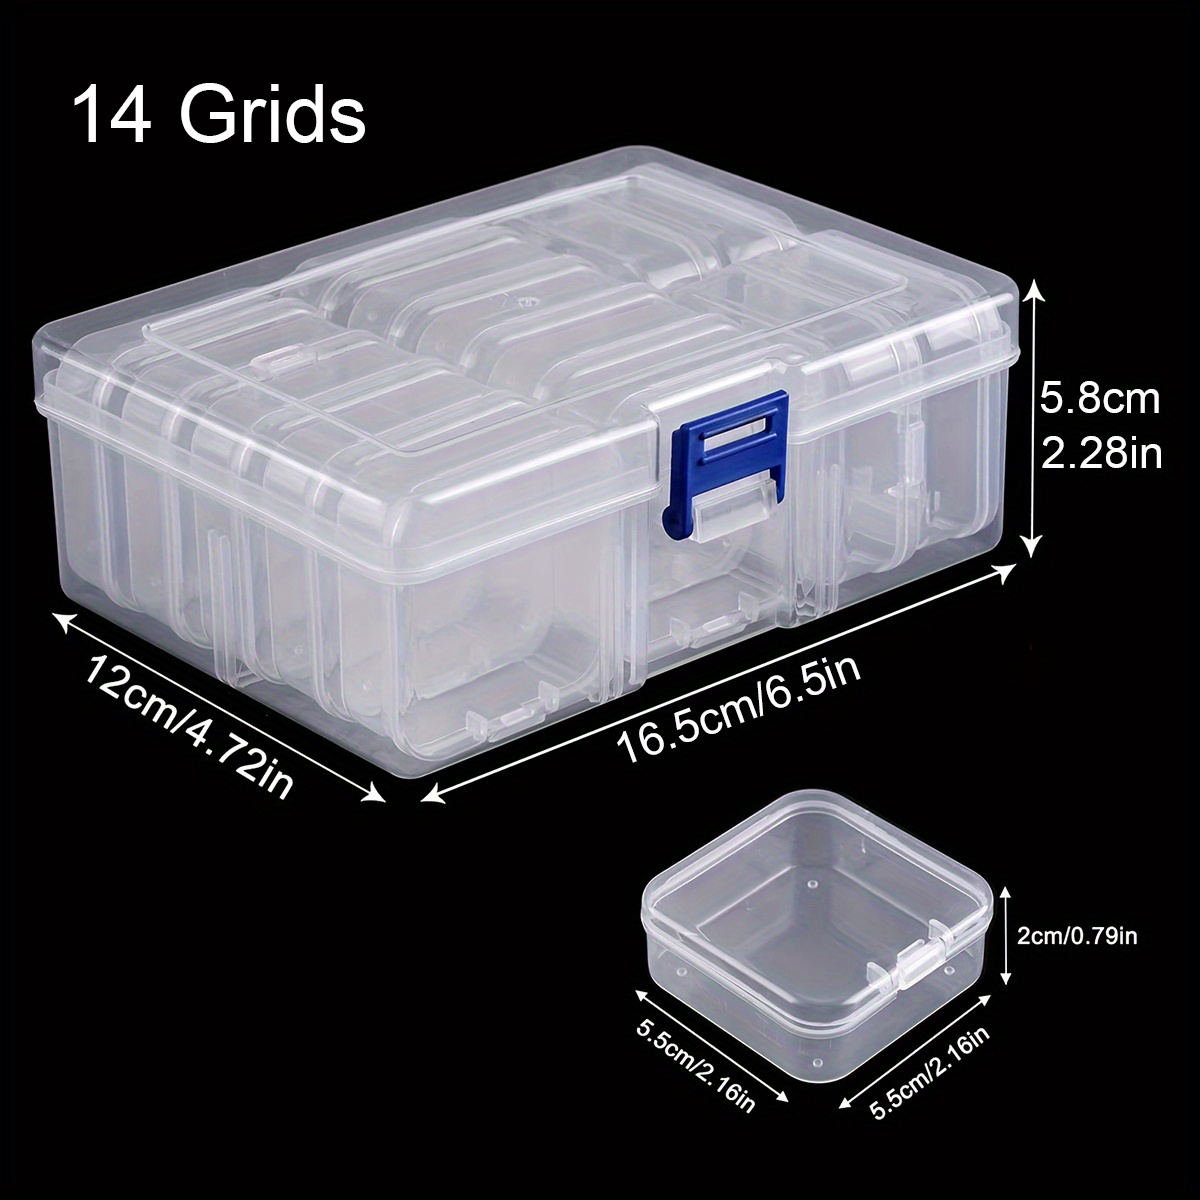 China Factory 8 Grids Unicorn Shape Plastic Organizer Boxes, Storage Container  for Beads Jewelry Nail Art Small Items 16x9.5x2cm in bulk online 